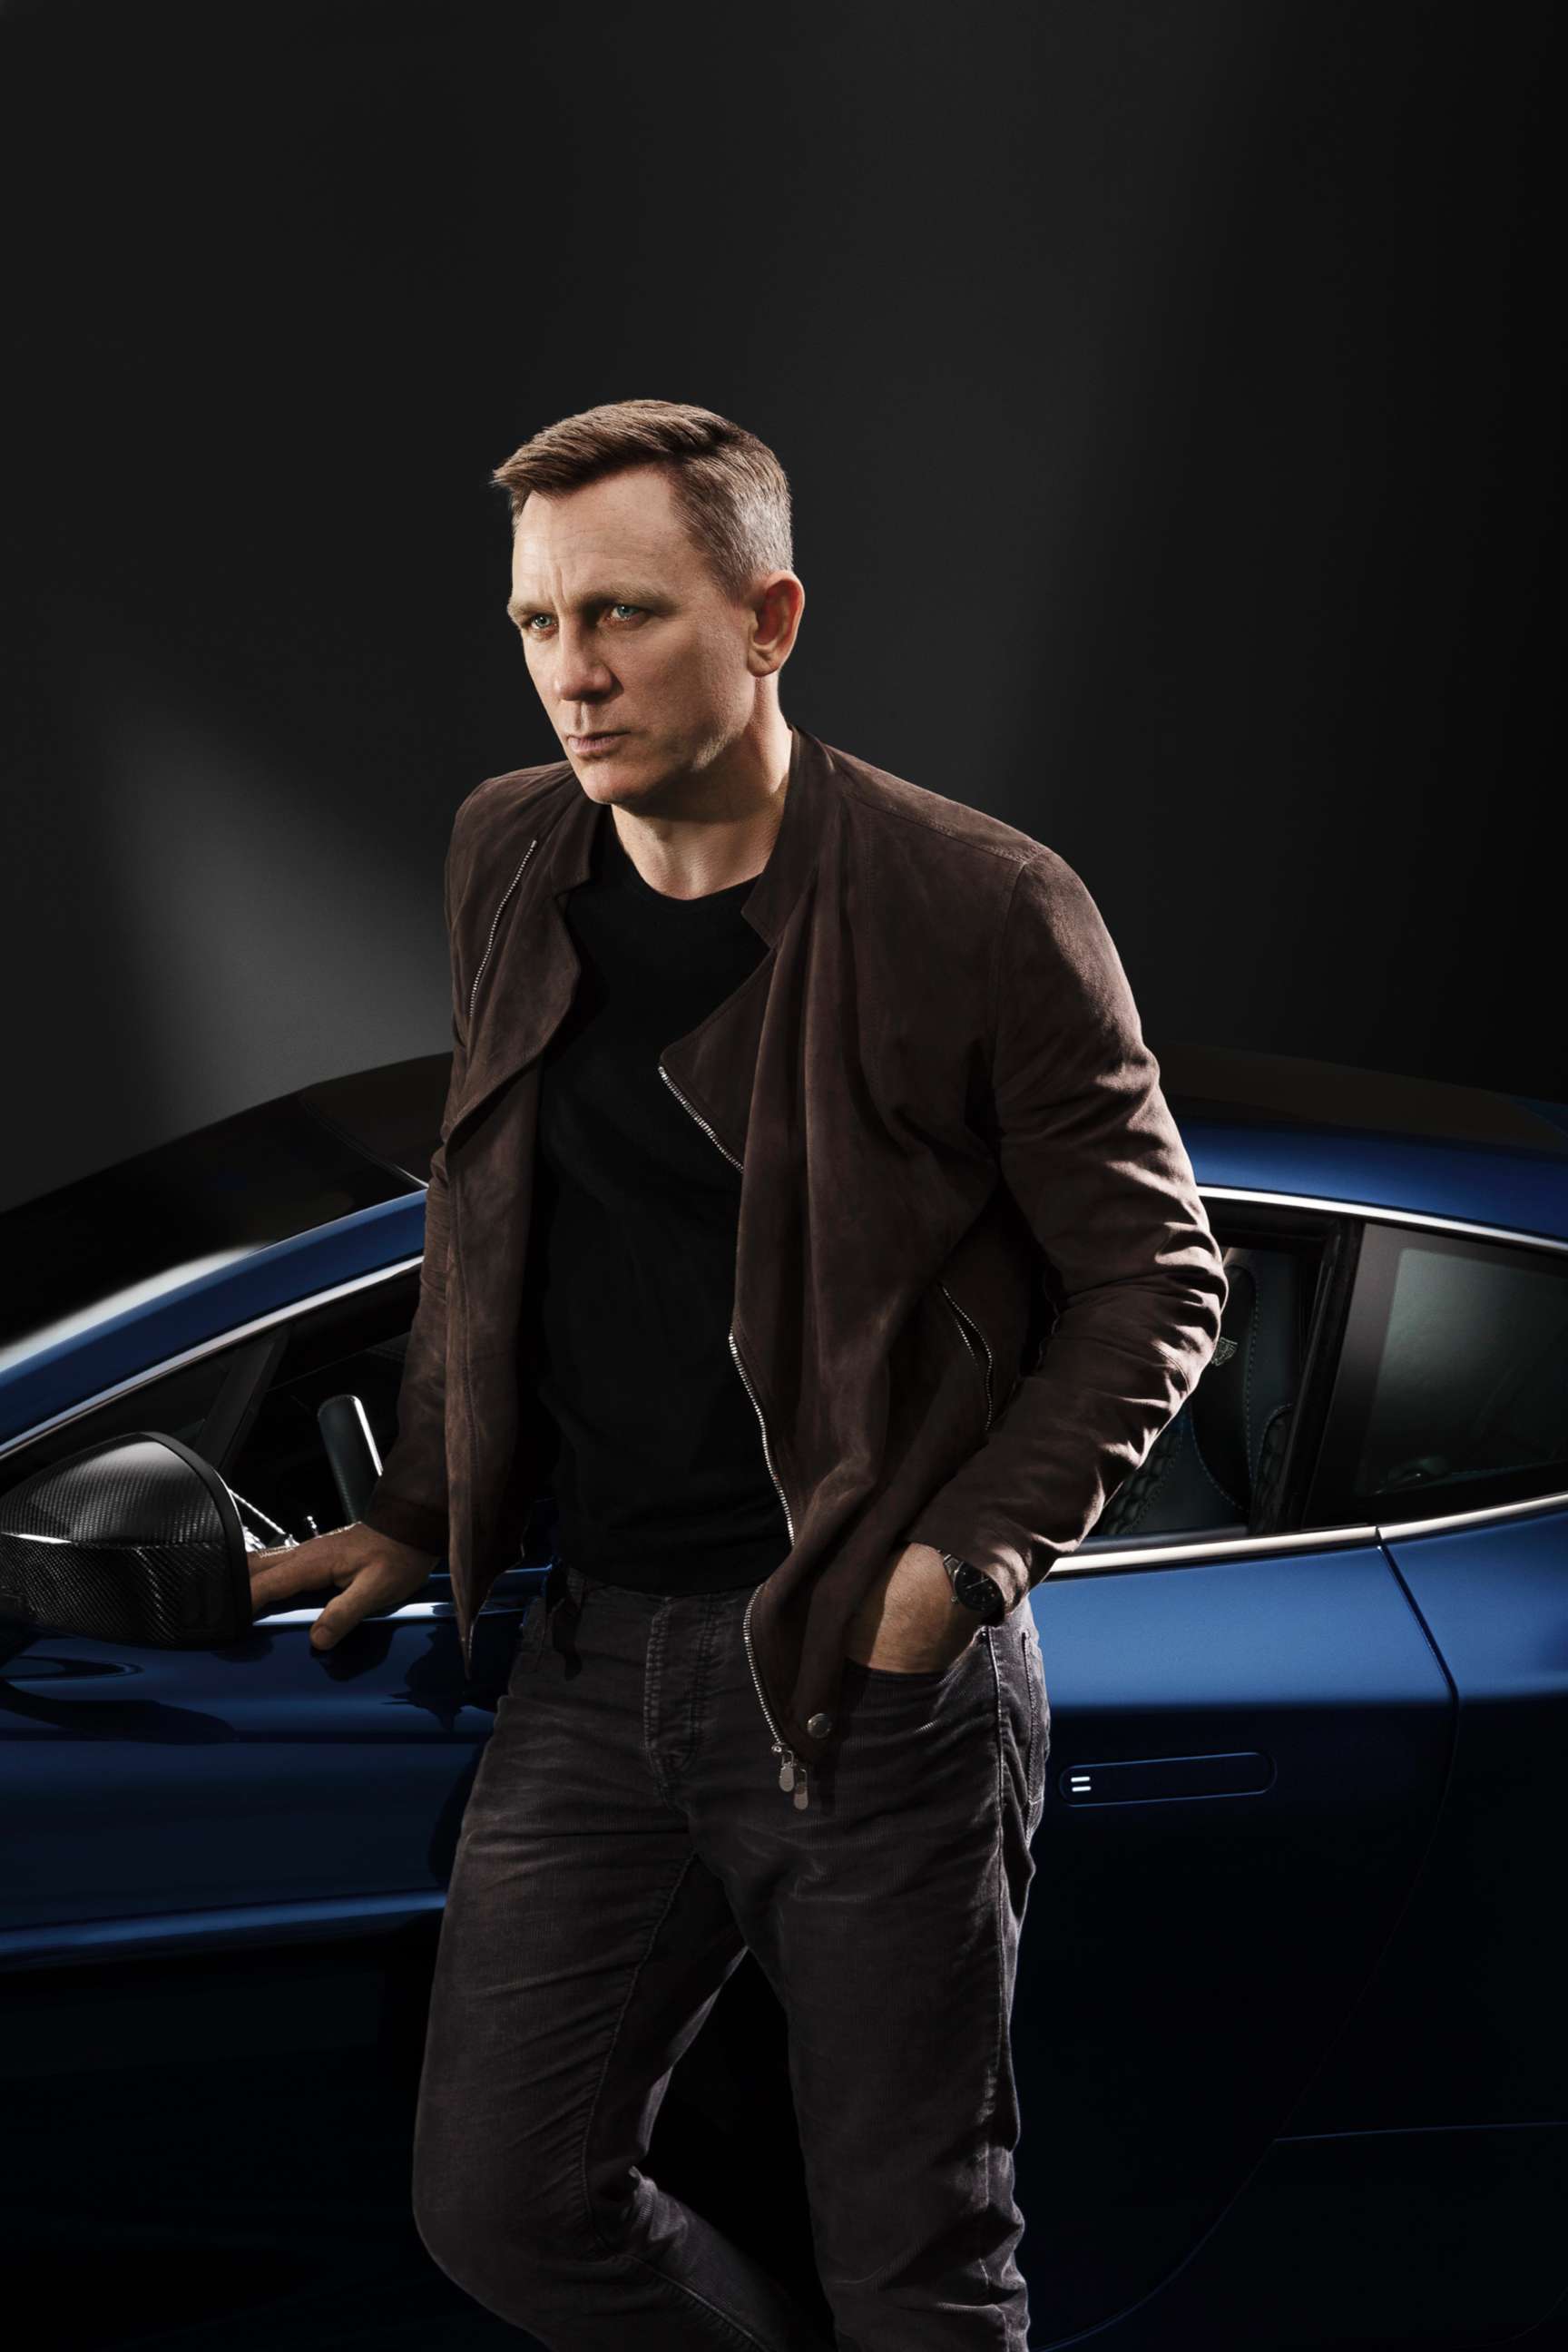 PHOTO: Daniel Craig is pictured with his limited edition Centennial Aston Martin Vanquish in an undated handout photo.